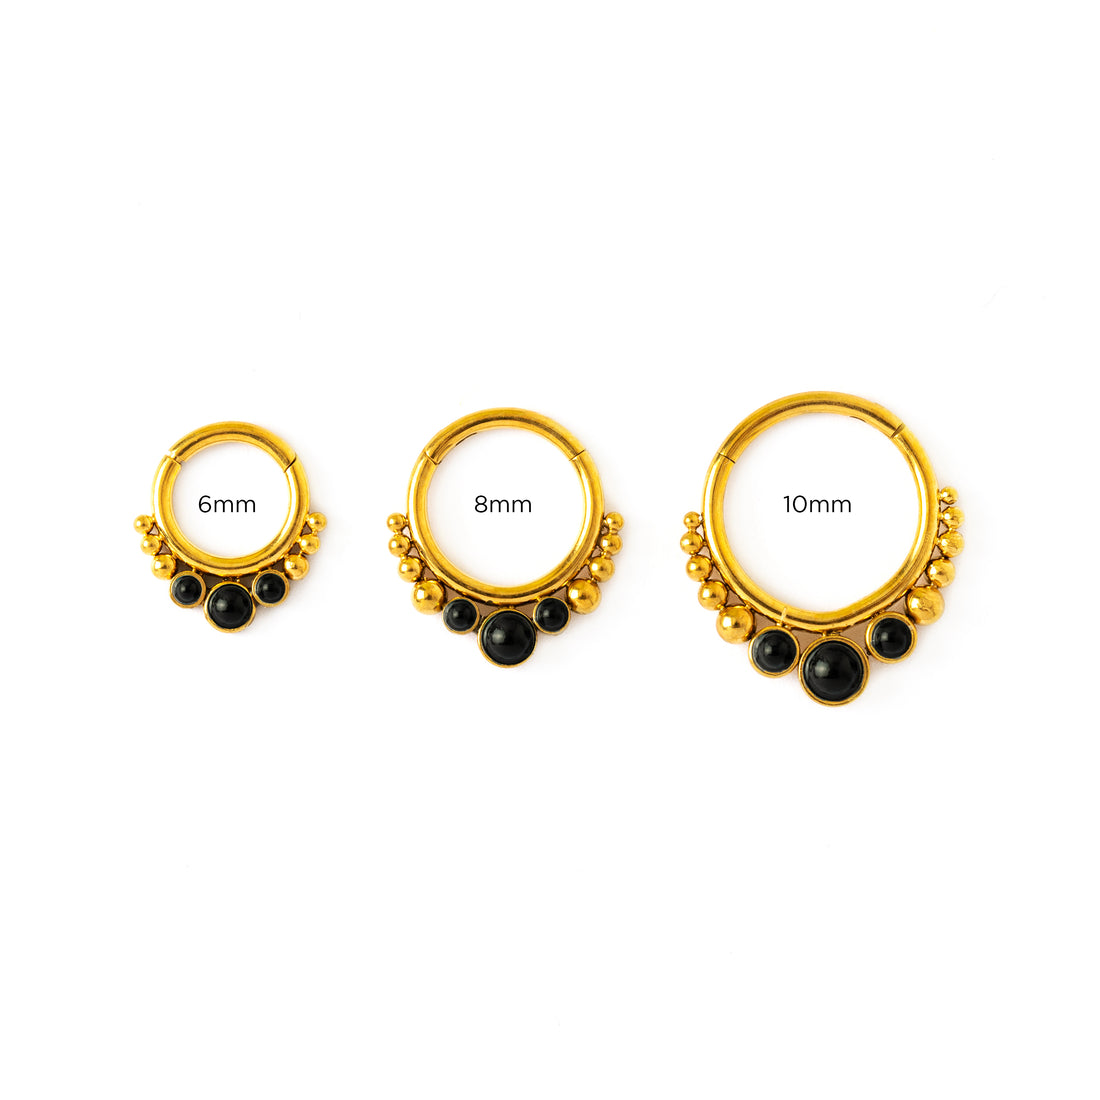 6mm, 8mm, 10mm Golden Siti Clicker Ring with Black Onyx